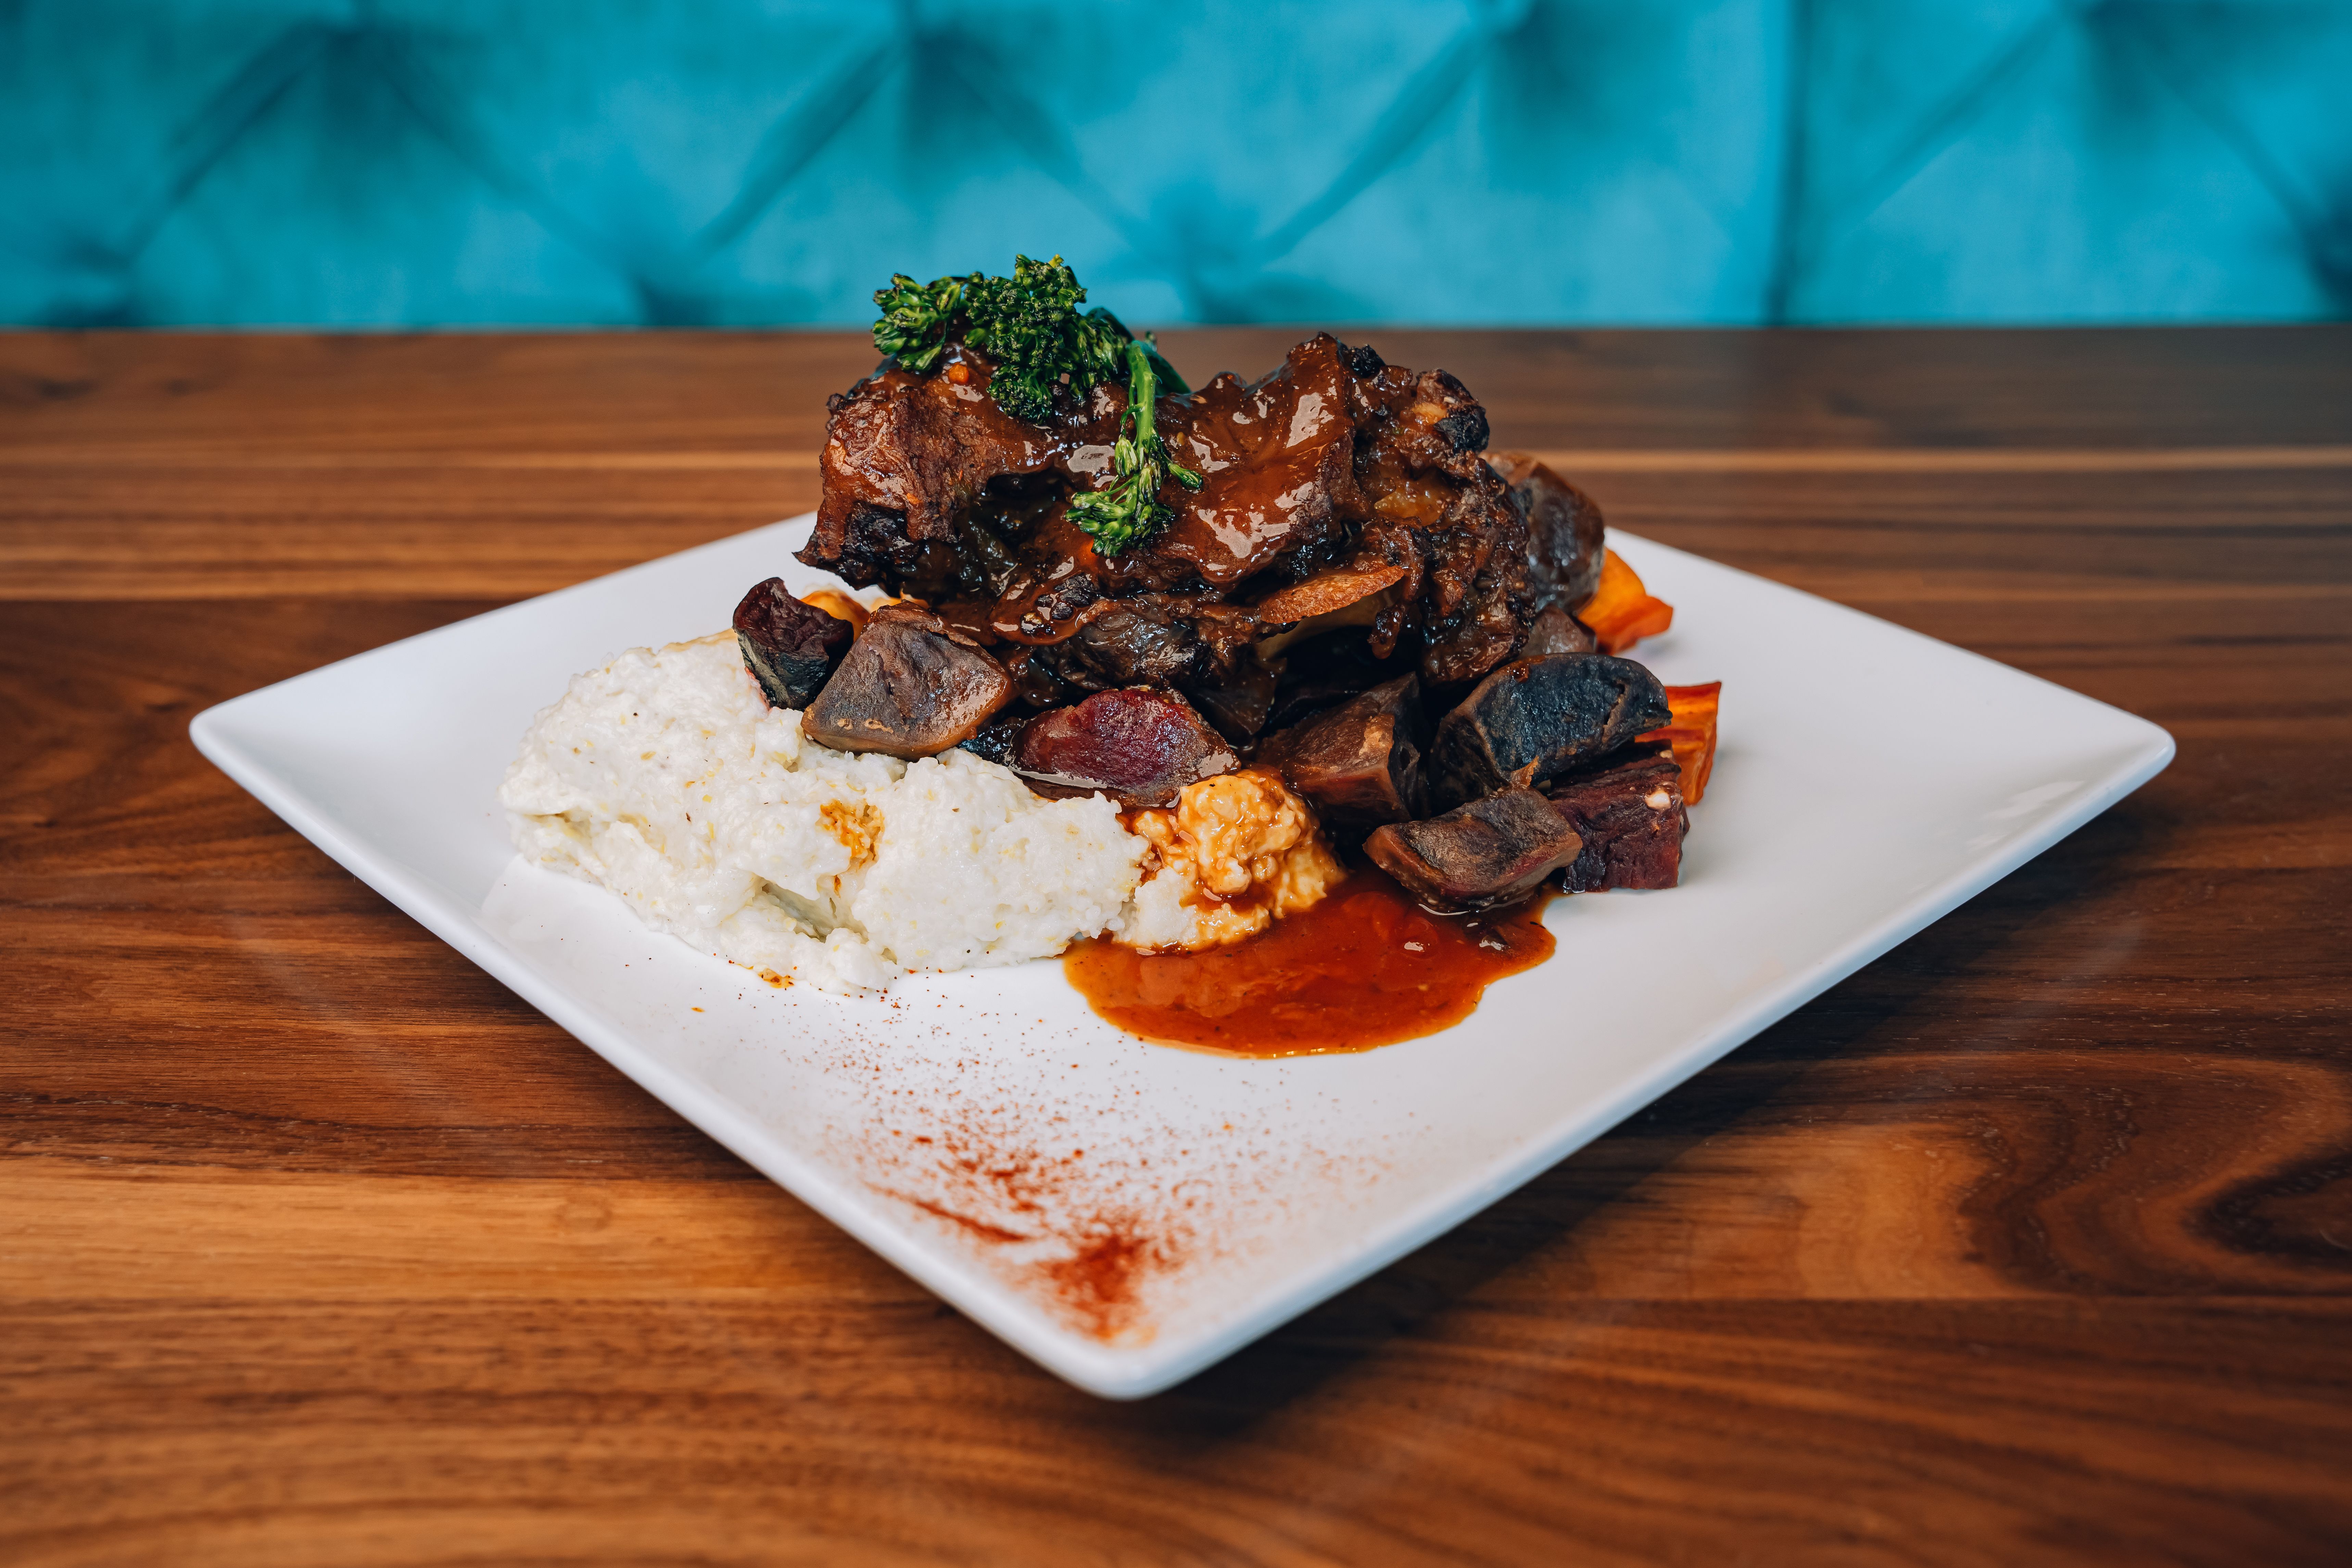 The oxtail and grits: Molasses-braised beef oxtails, stewed vegetables and coconut grits are served on a white square plate.